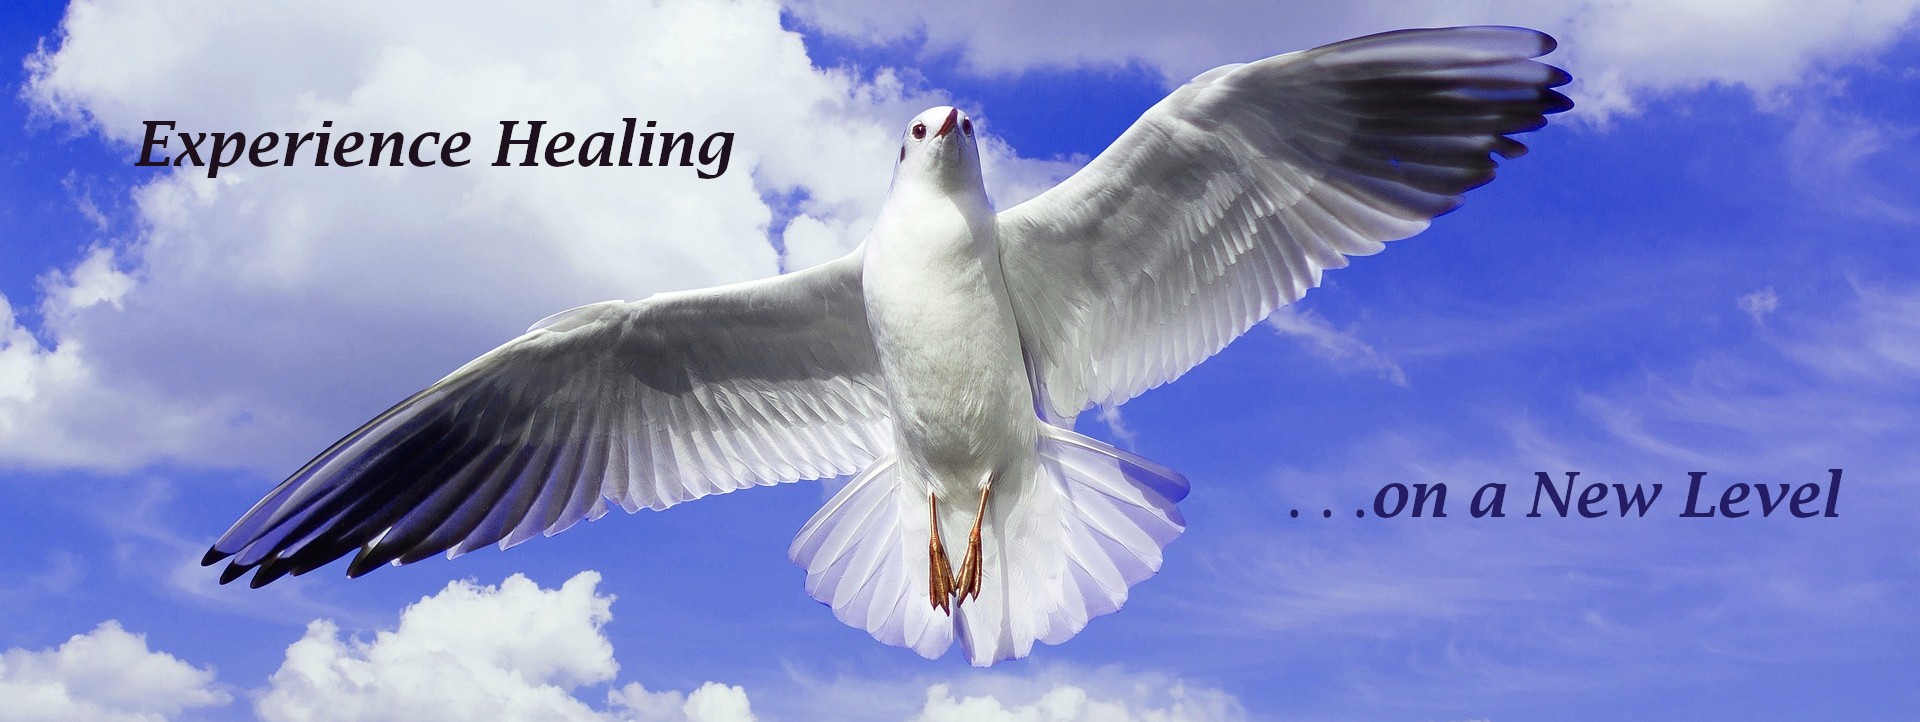 A white dove soars in the sky above.